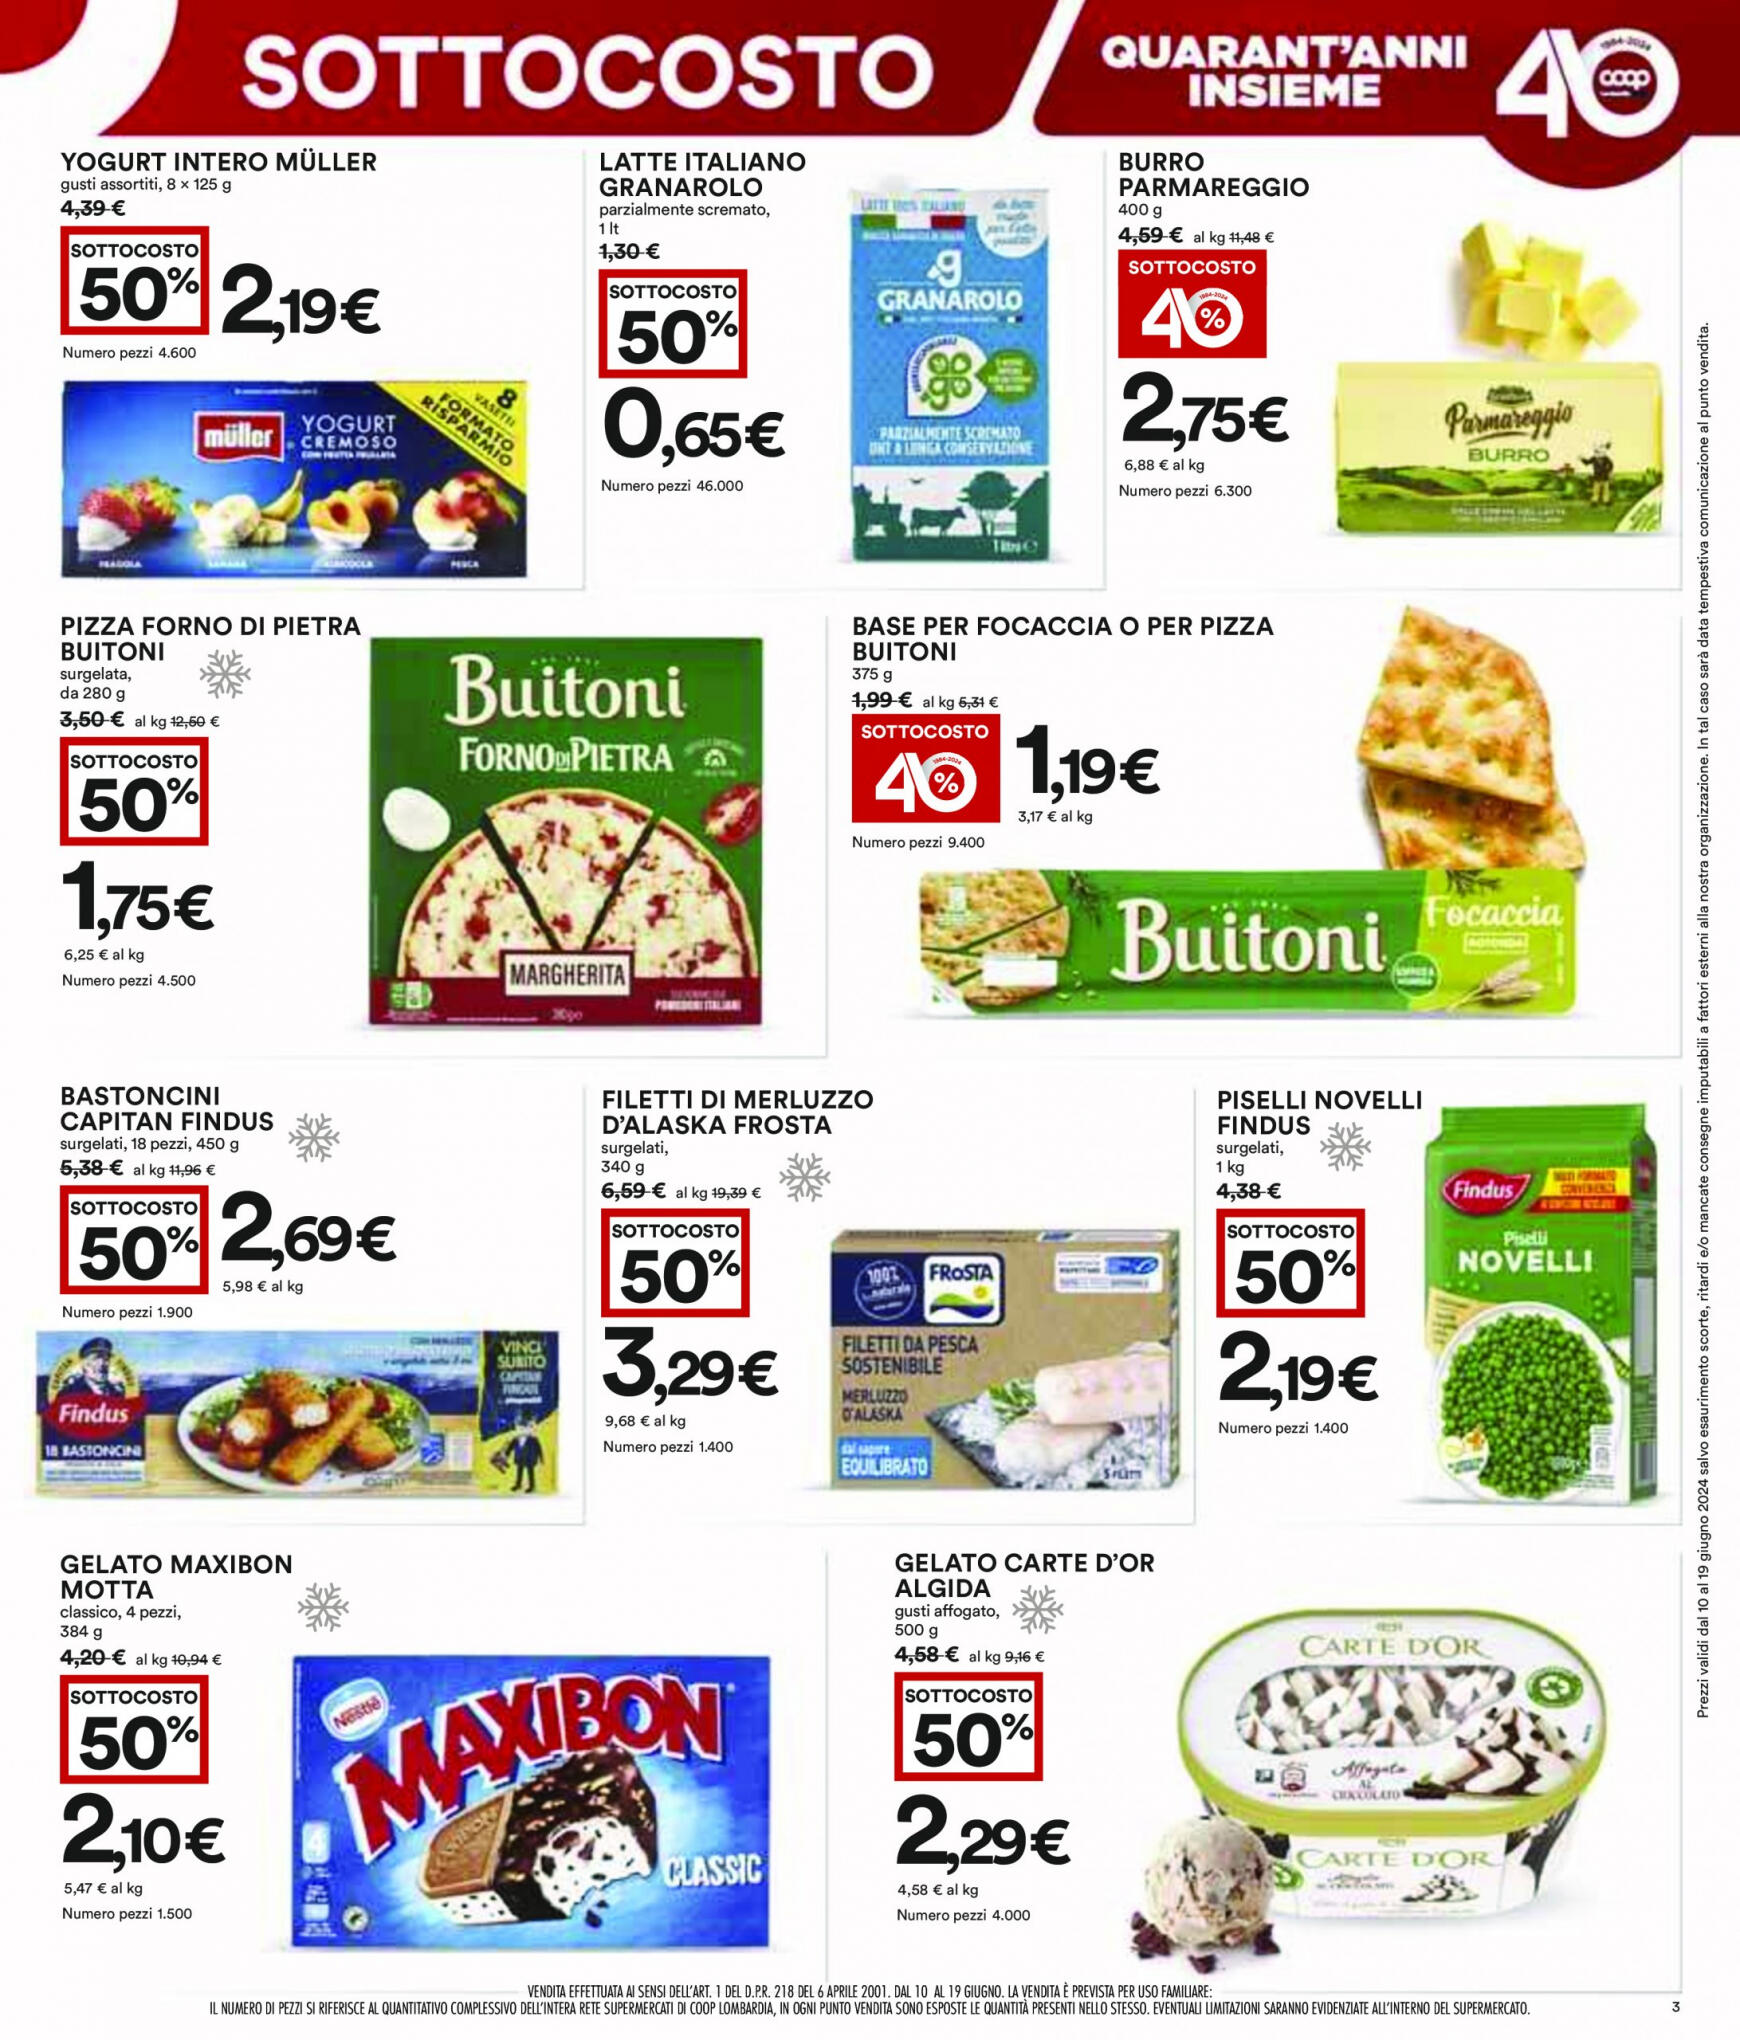 coop - Nuovo volantino Coop 10.06. - 19.06. - page: 3